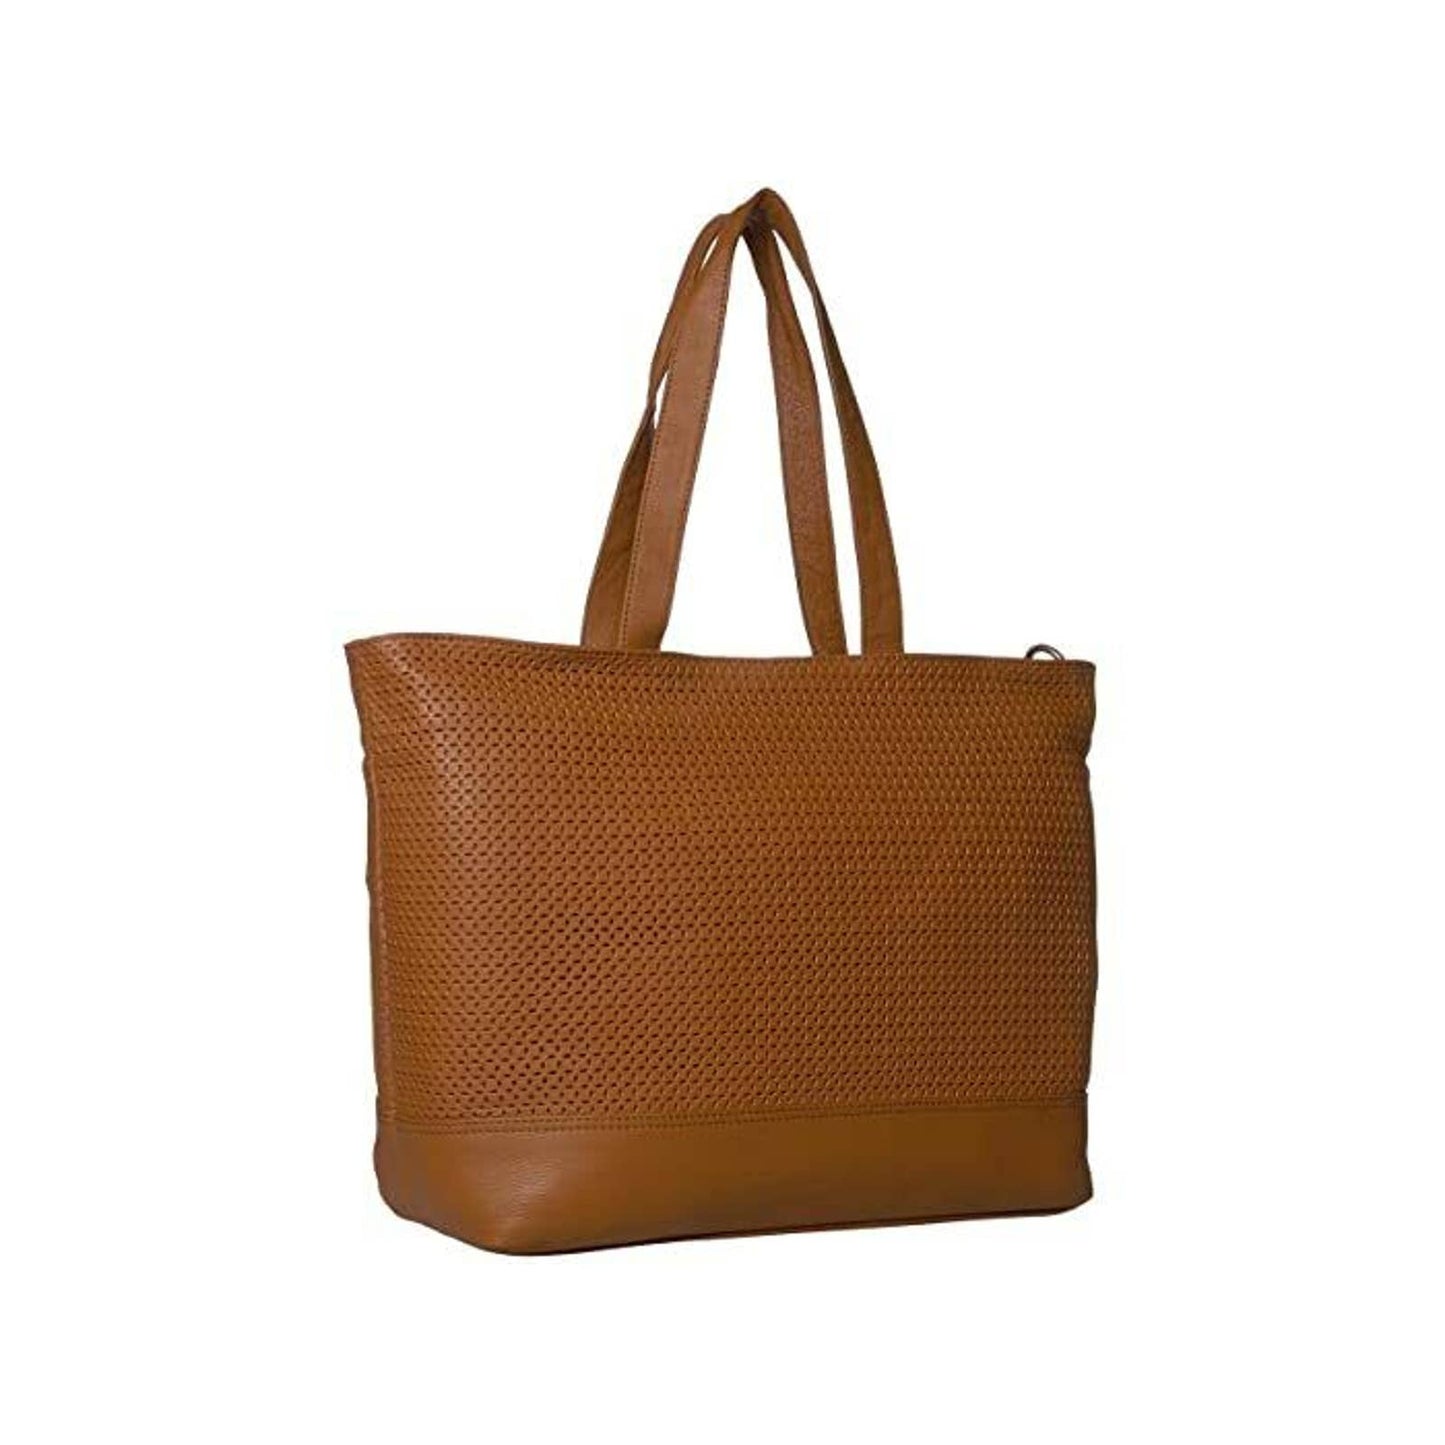 FRYE ANISE TOTE COGNAC LEATHER ANTIQUE BRASS HARDWARE